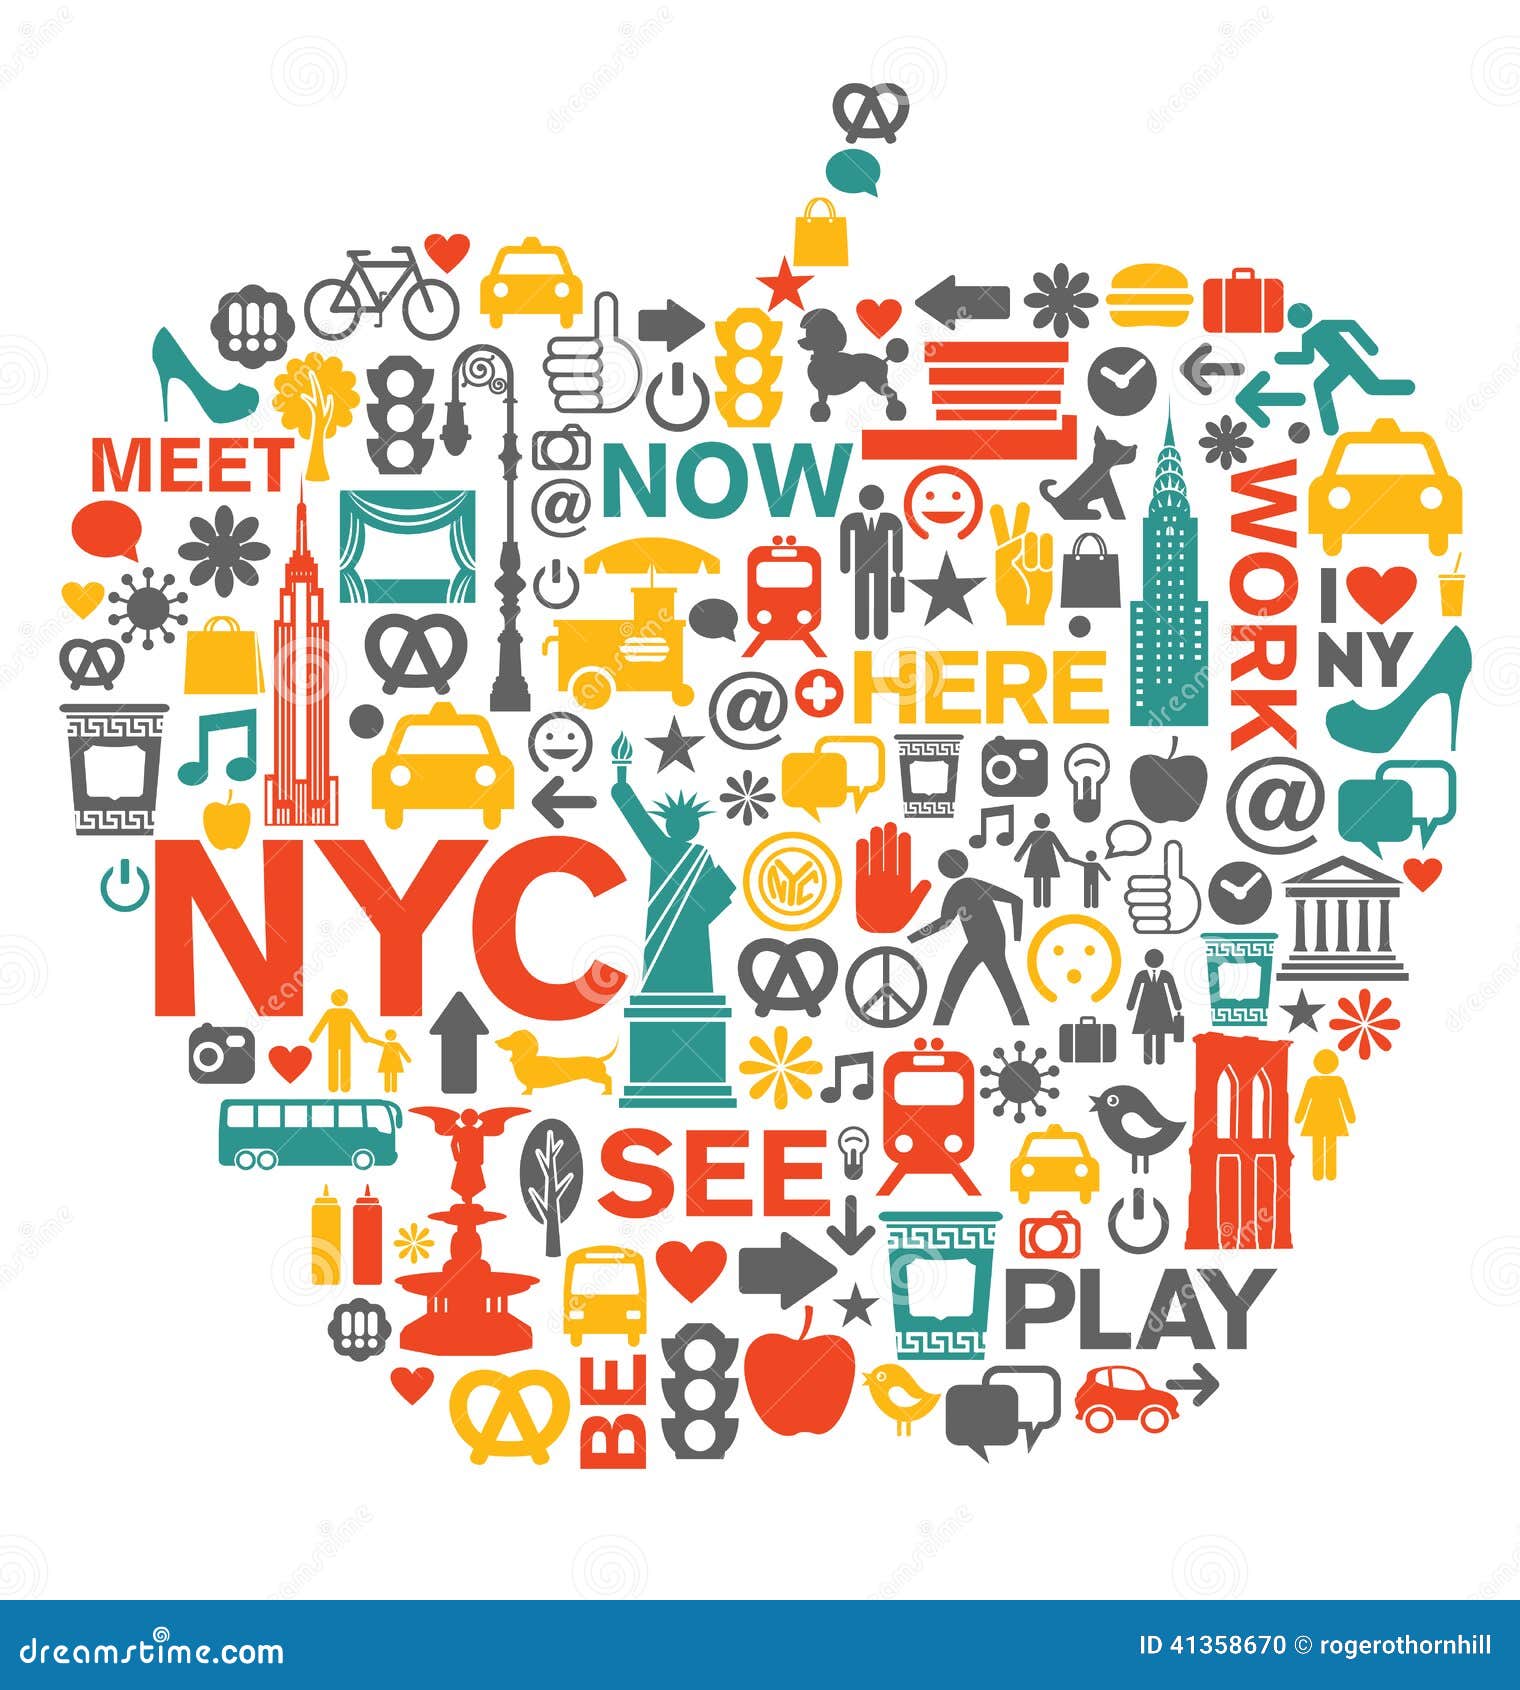 New York City Icons And Symbols Stock Vector - Illustration of bags